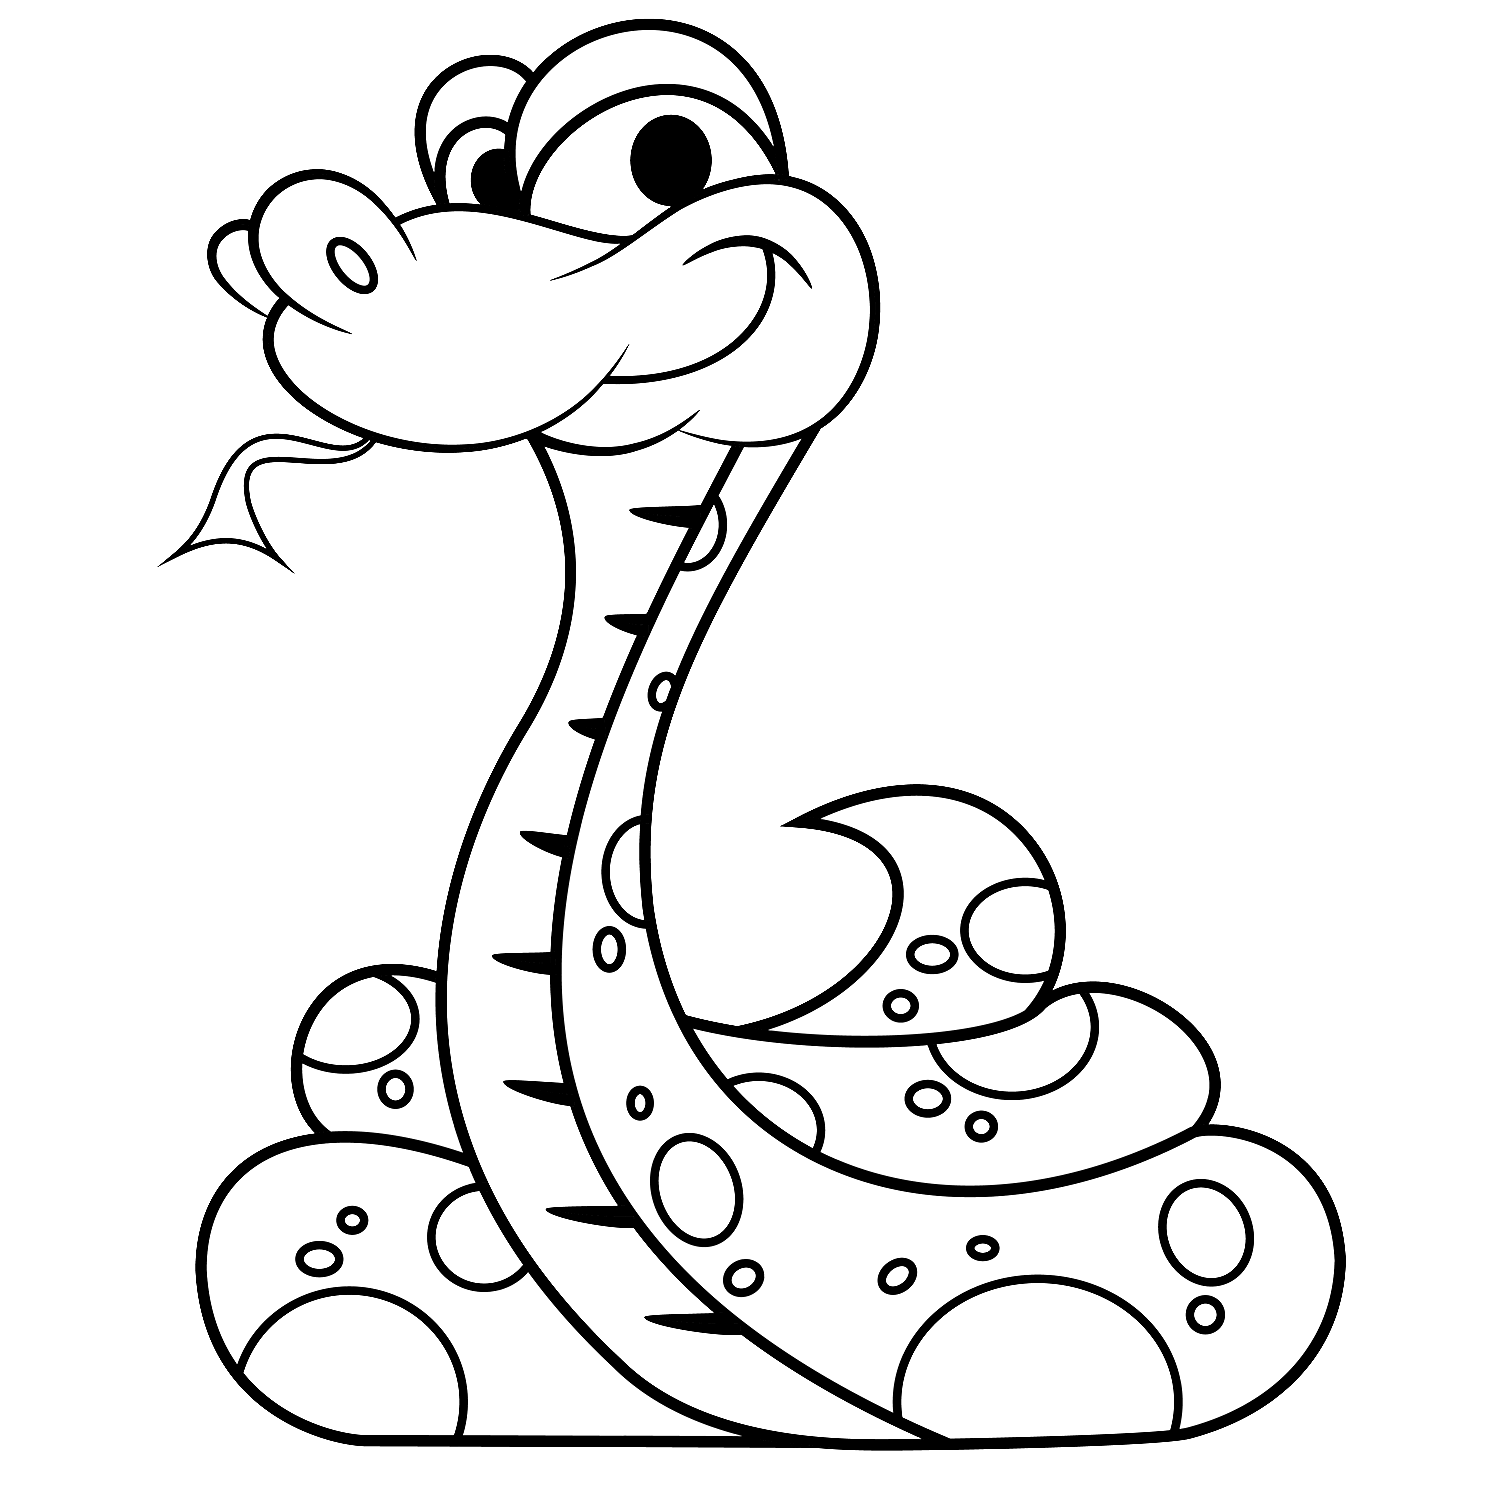 Simple Snake Line Drawing - ClipArt Best